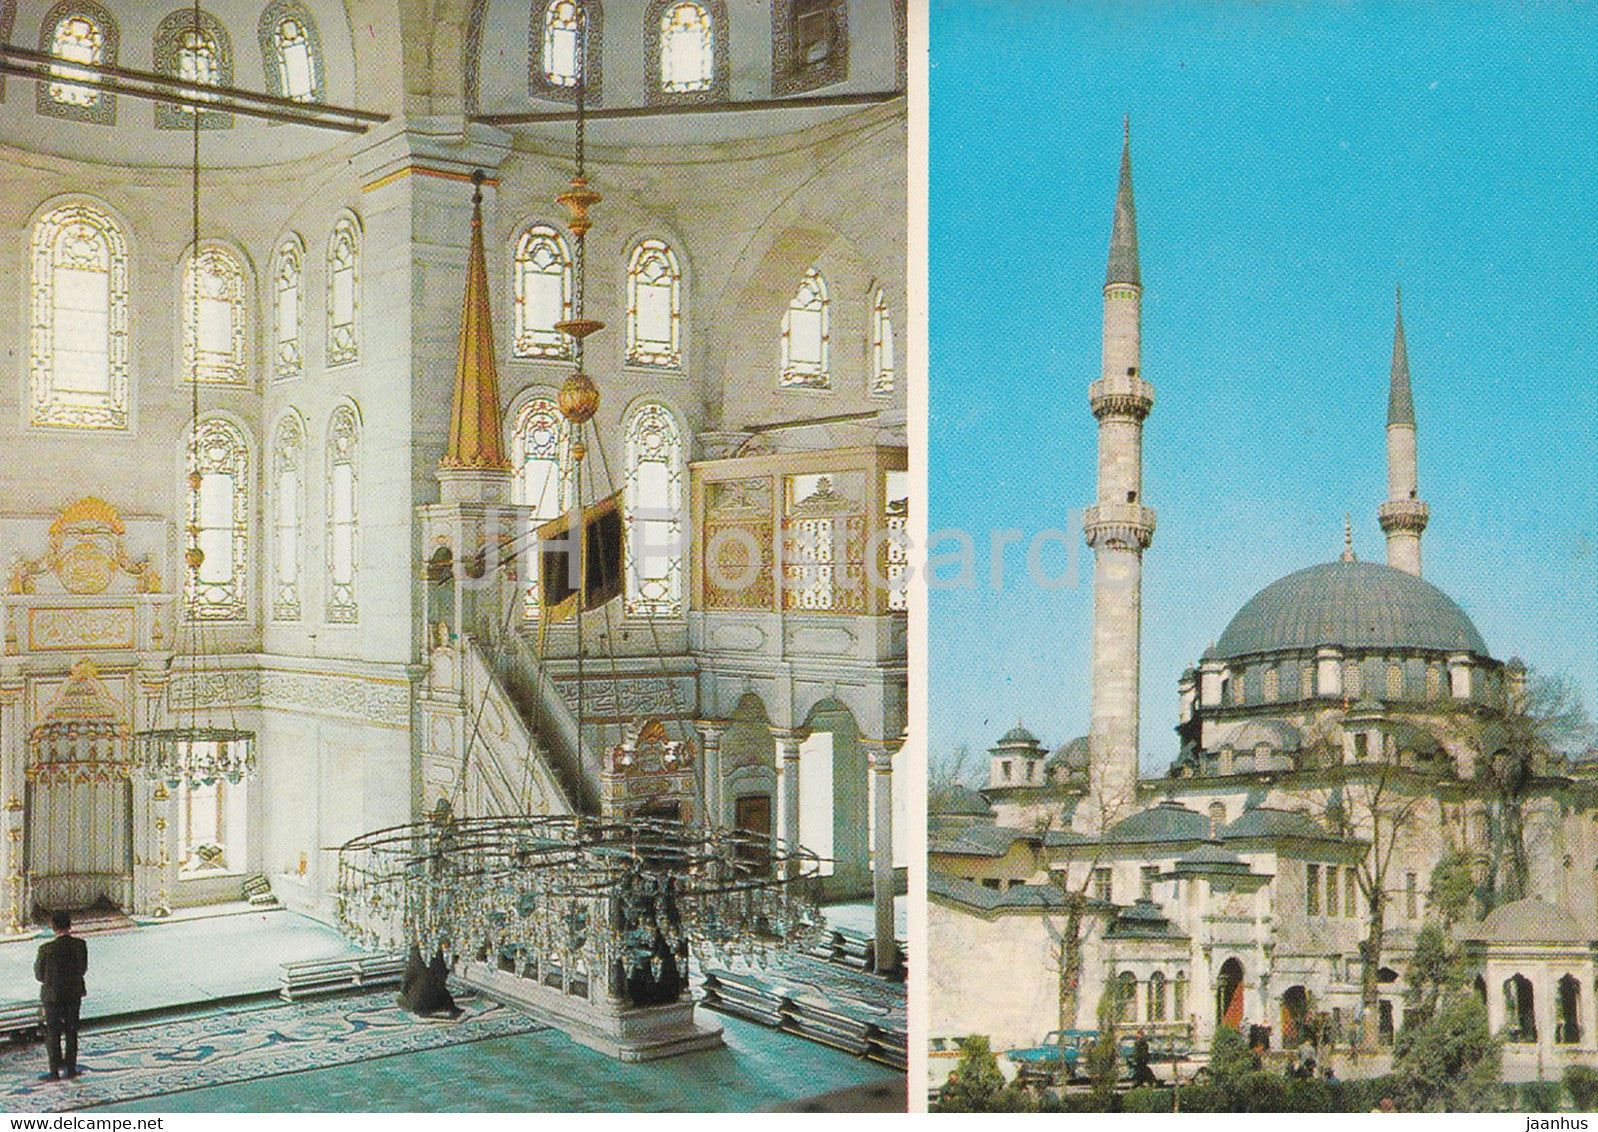 Istanbul - Eyup Sultan Mosque and Interior - Turkey - unused - JH Postcards